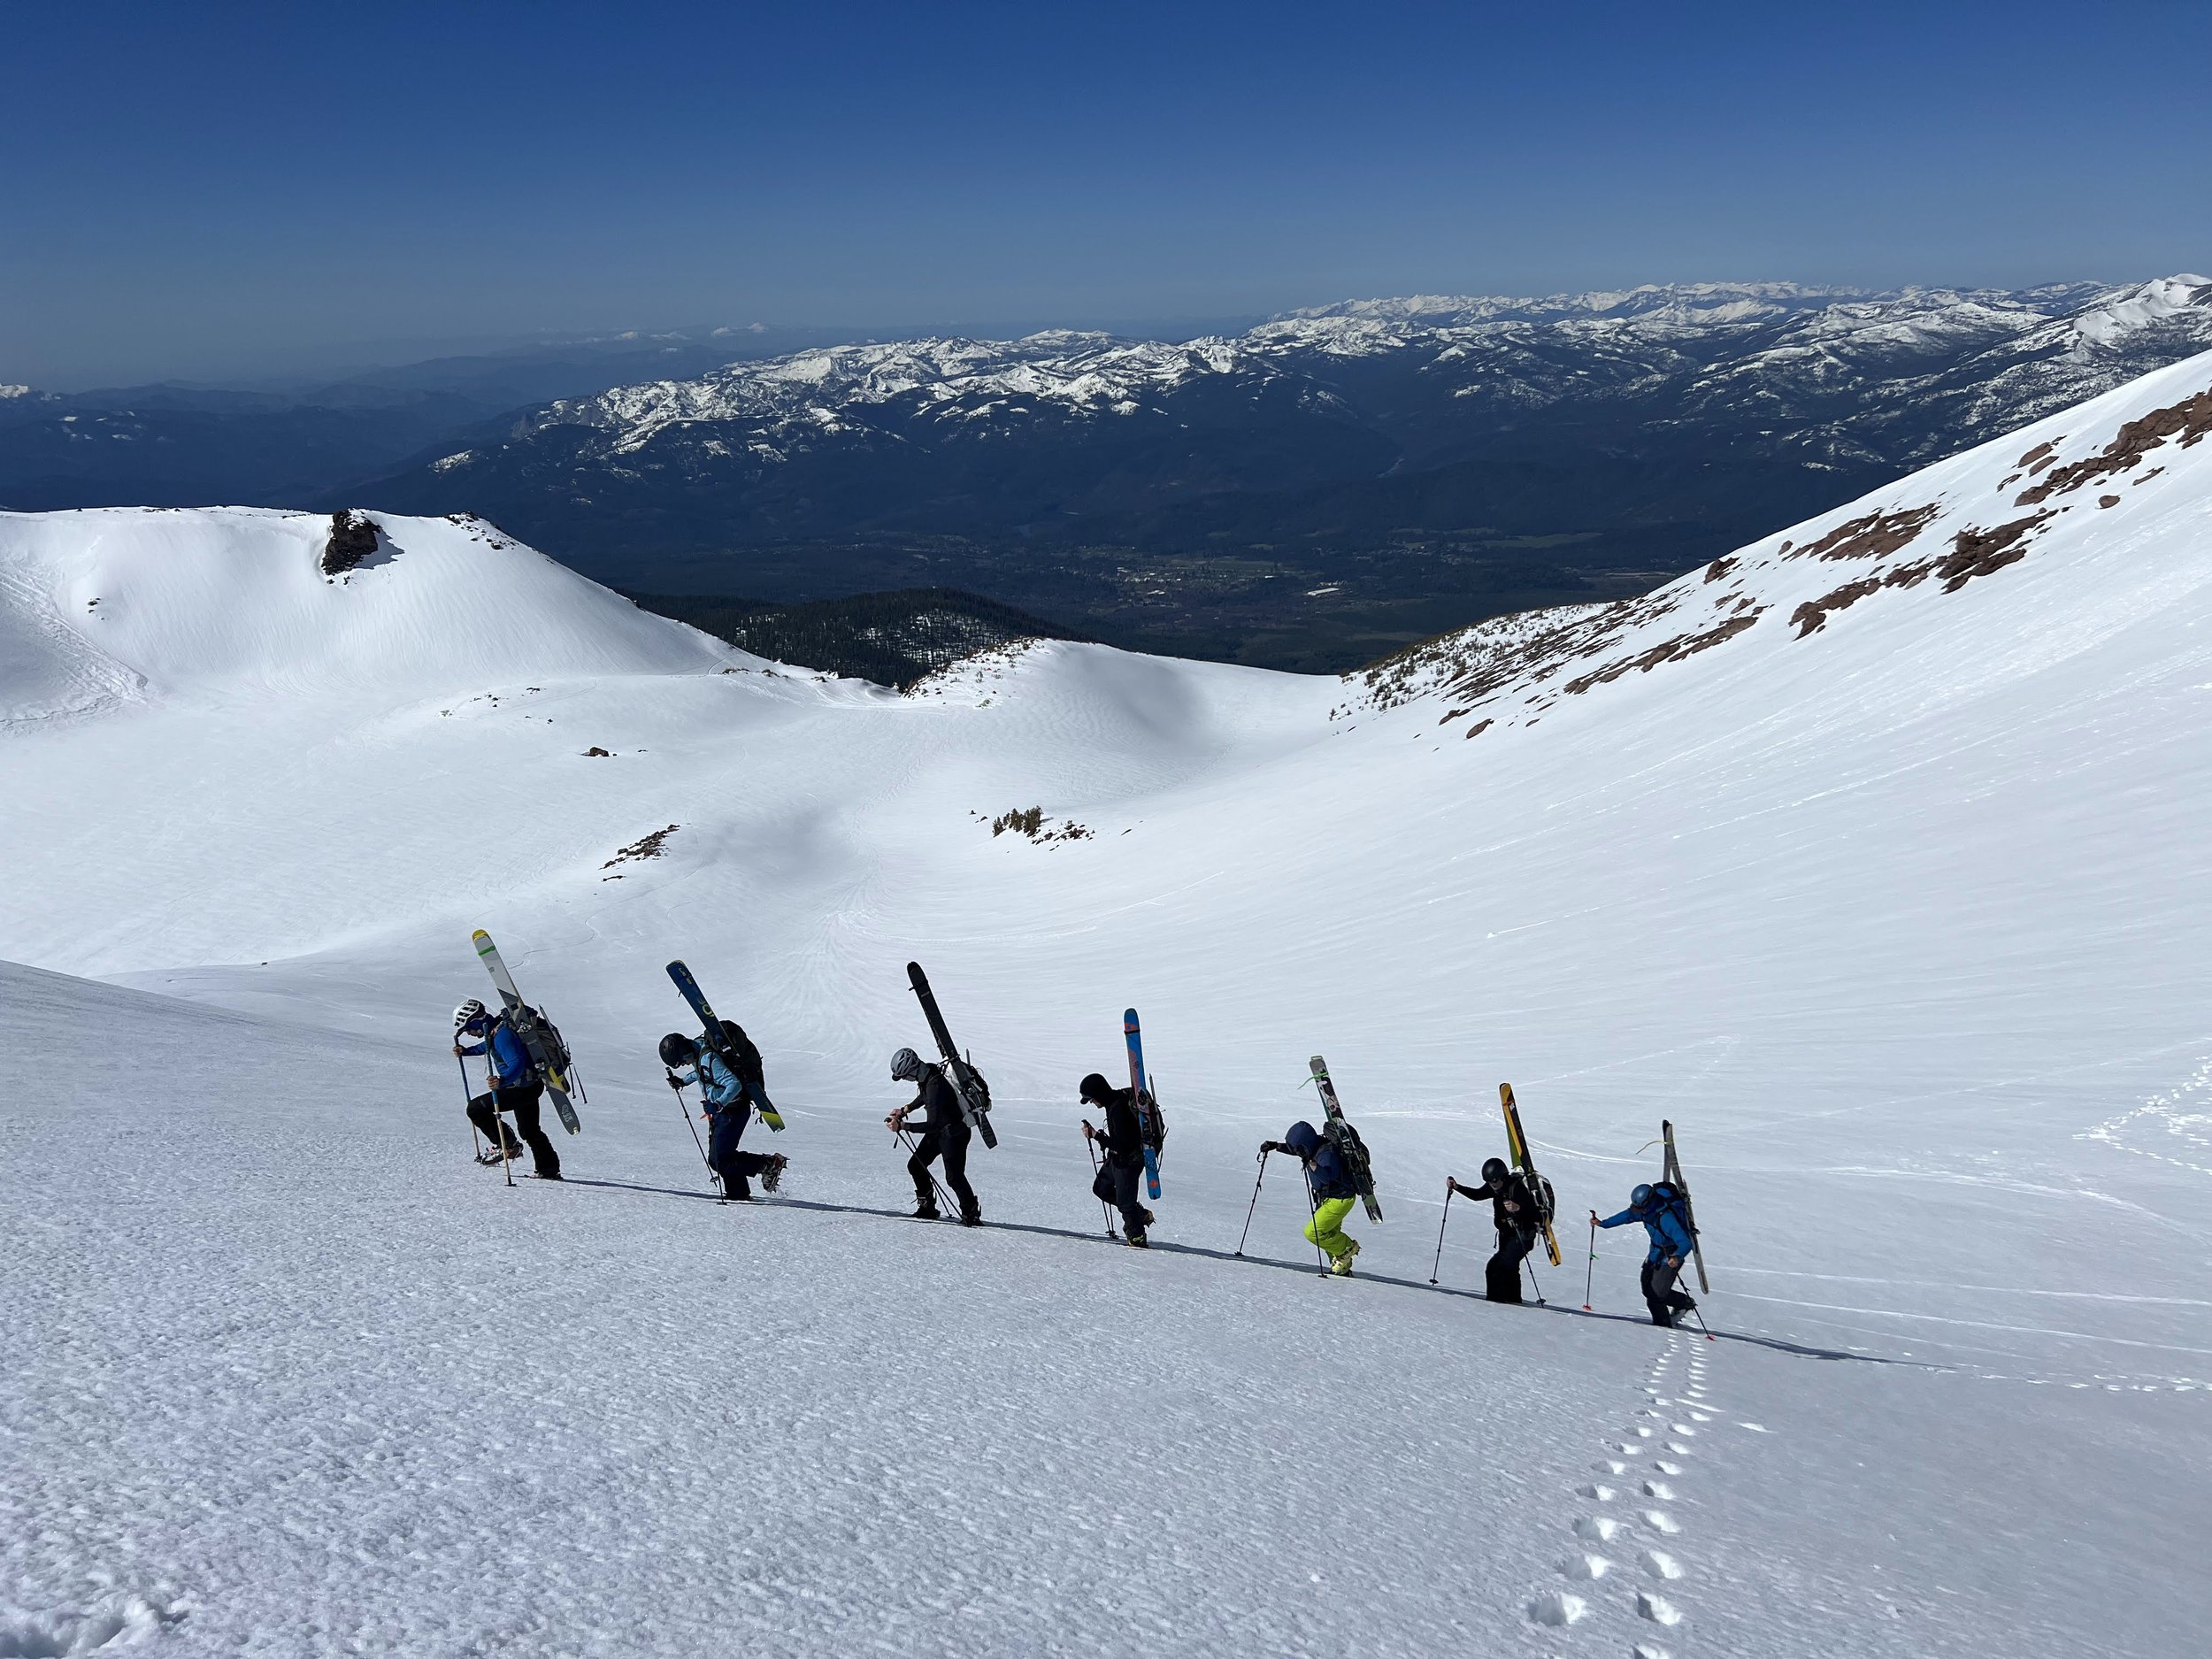 Group of skiers hikes up the slopes of mt shasta